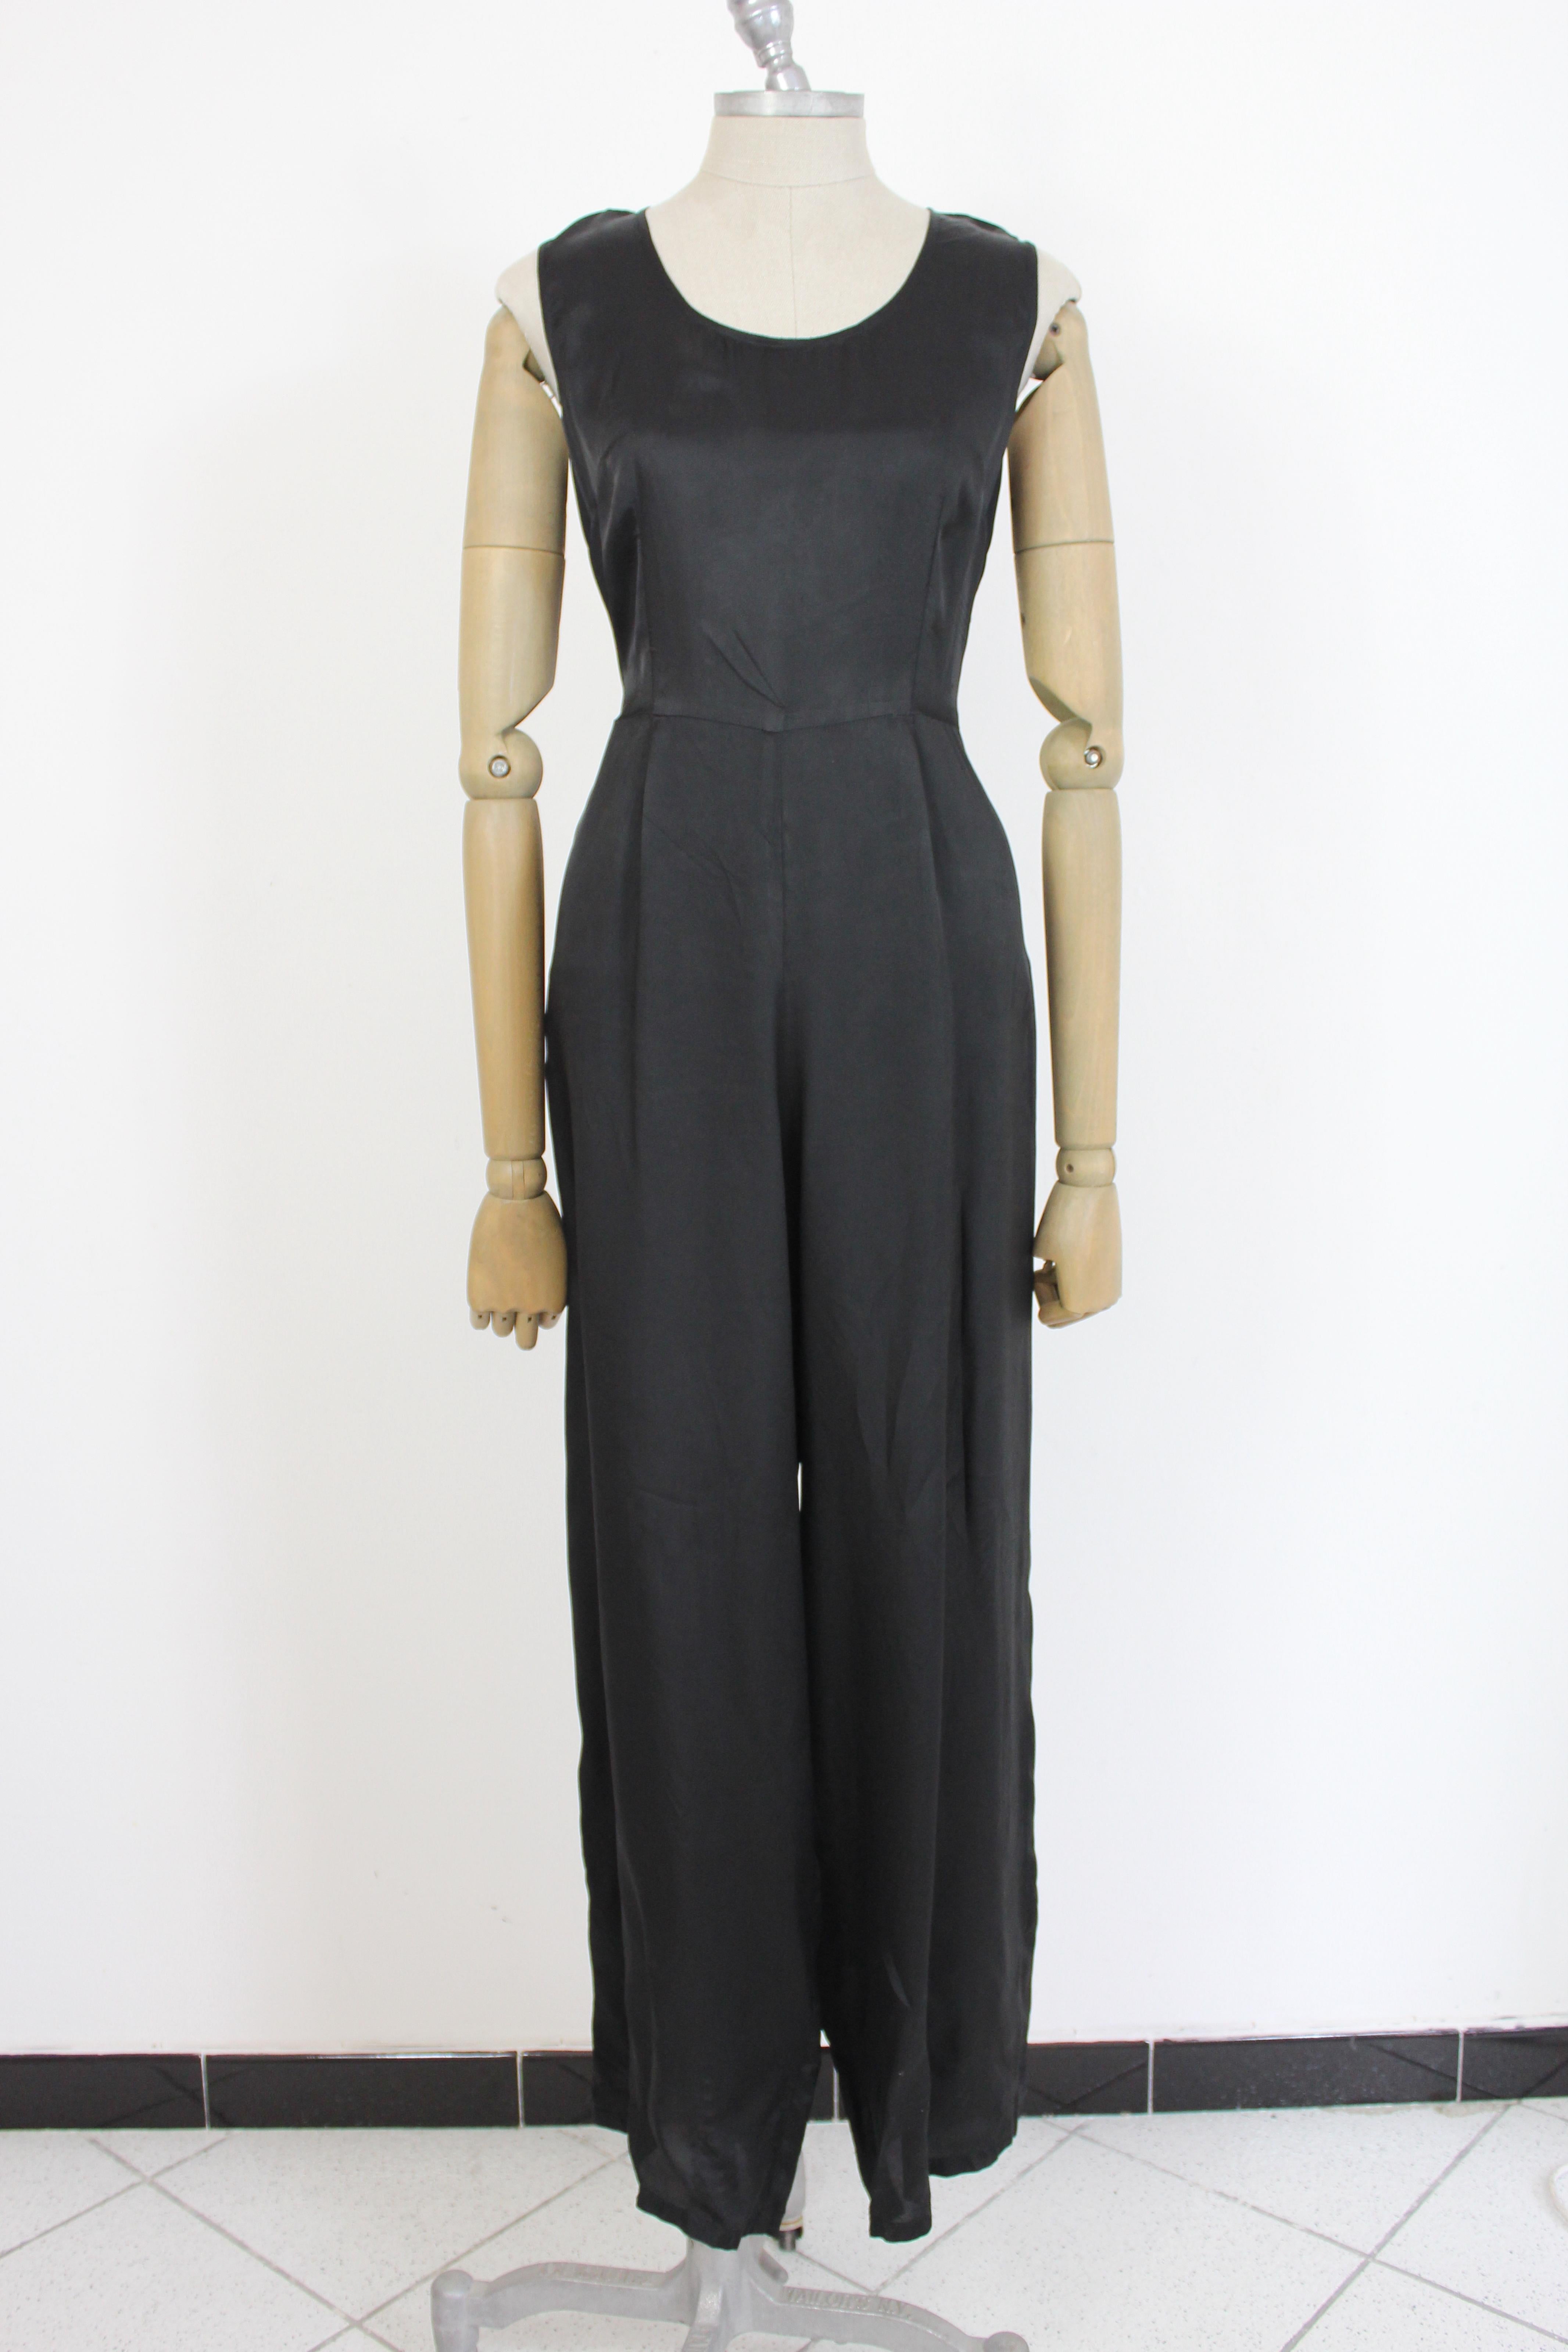 Dries Van Noten vintage 90s dress. Elegant suit, long model, soft fit, black color. Zipper on the sides, polyester fabric. Made in Belgium.

Condition: Excellent

Article used few times, it remains in its excellent condition. There are no visible